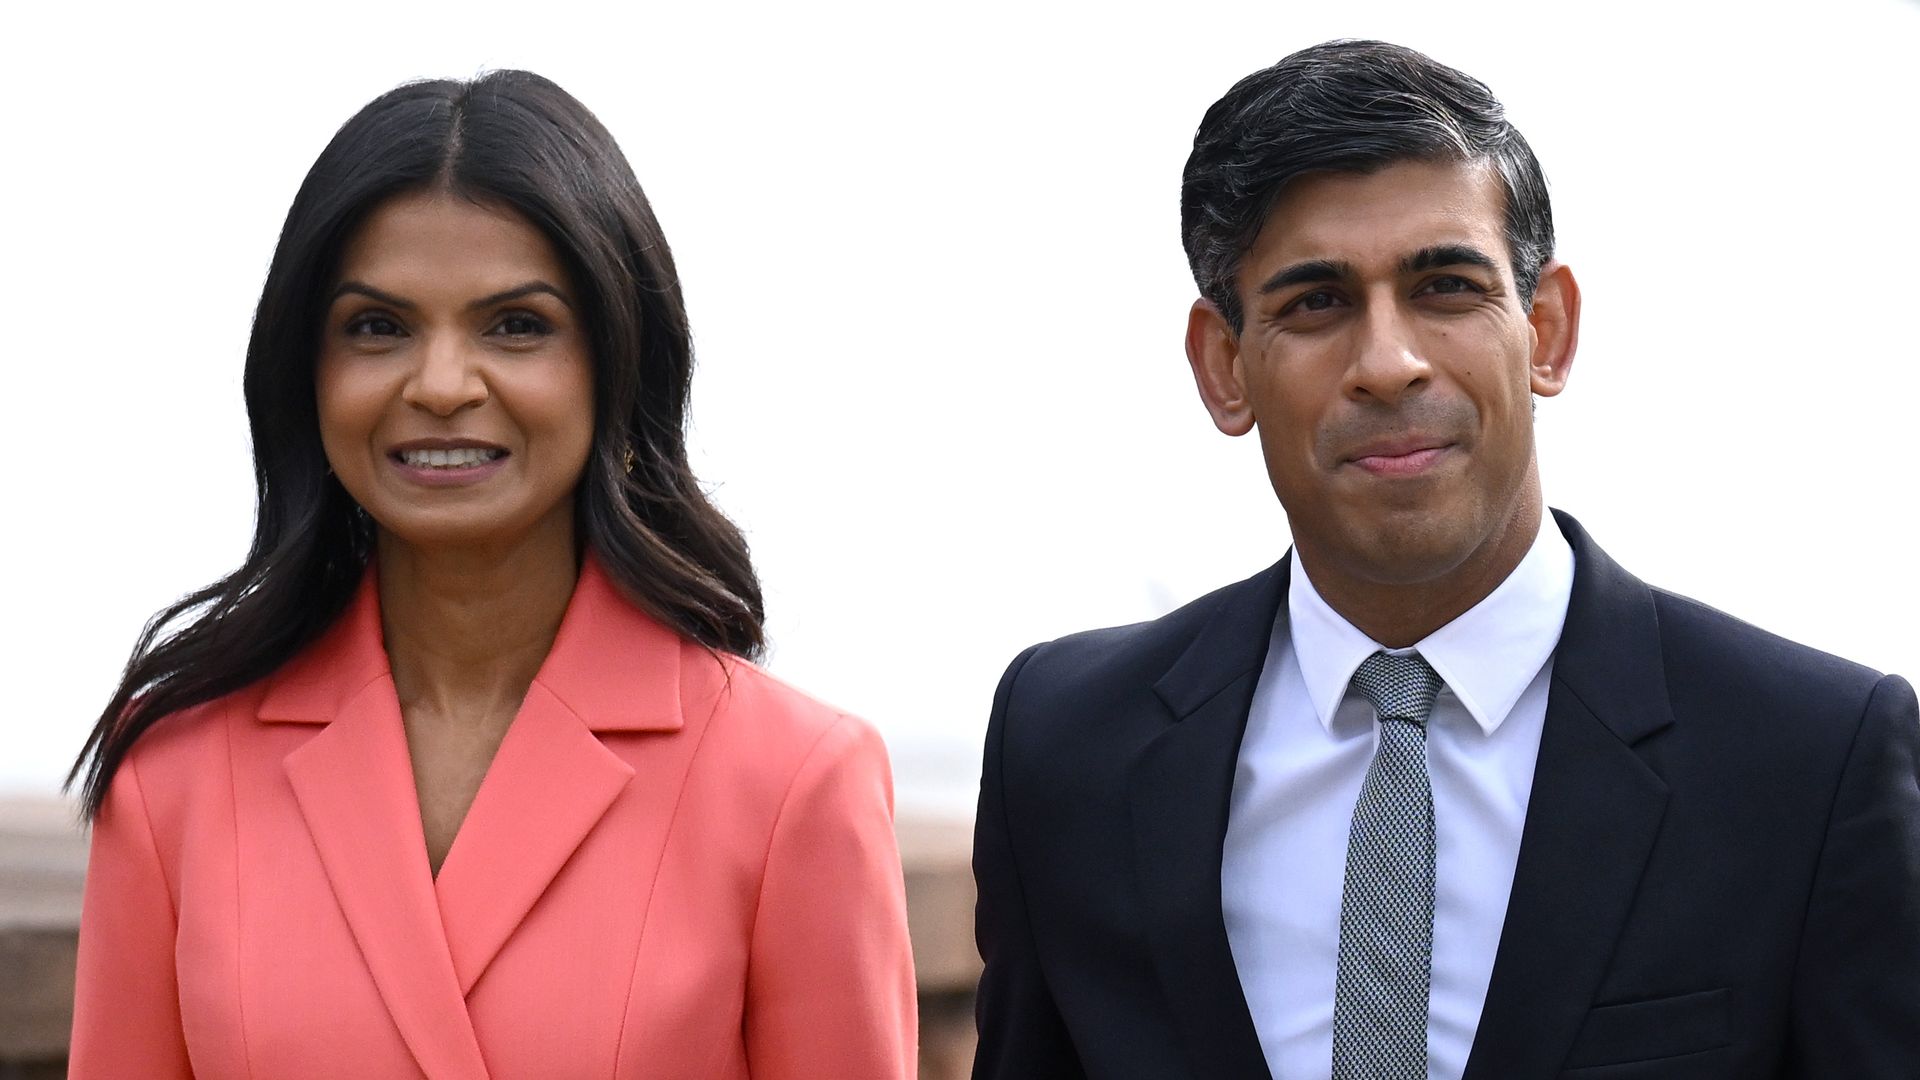 Rishi Sunak and his wife Akshata Murty arrive during day four of the Conservative Party Conference